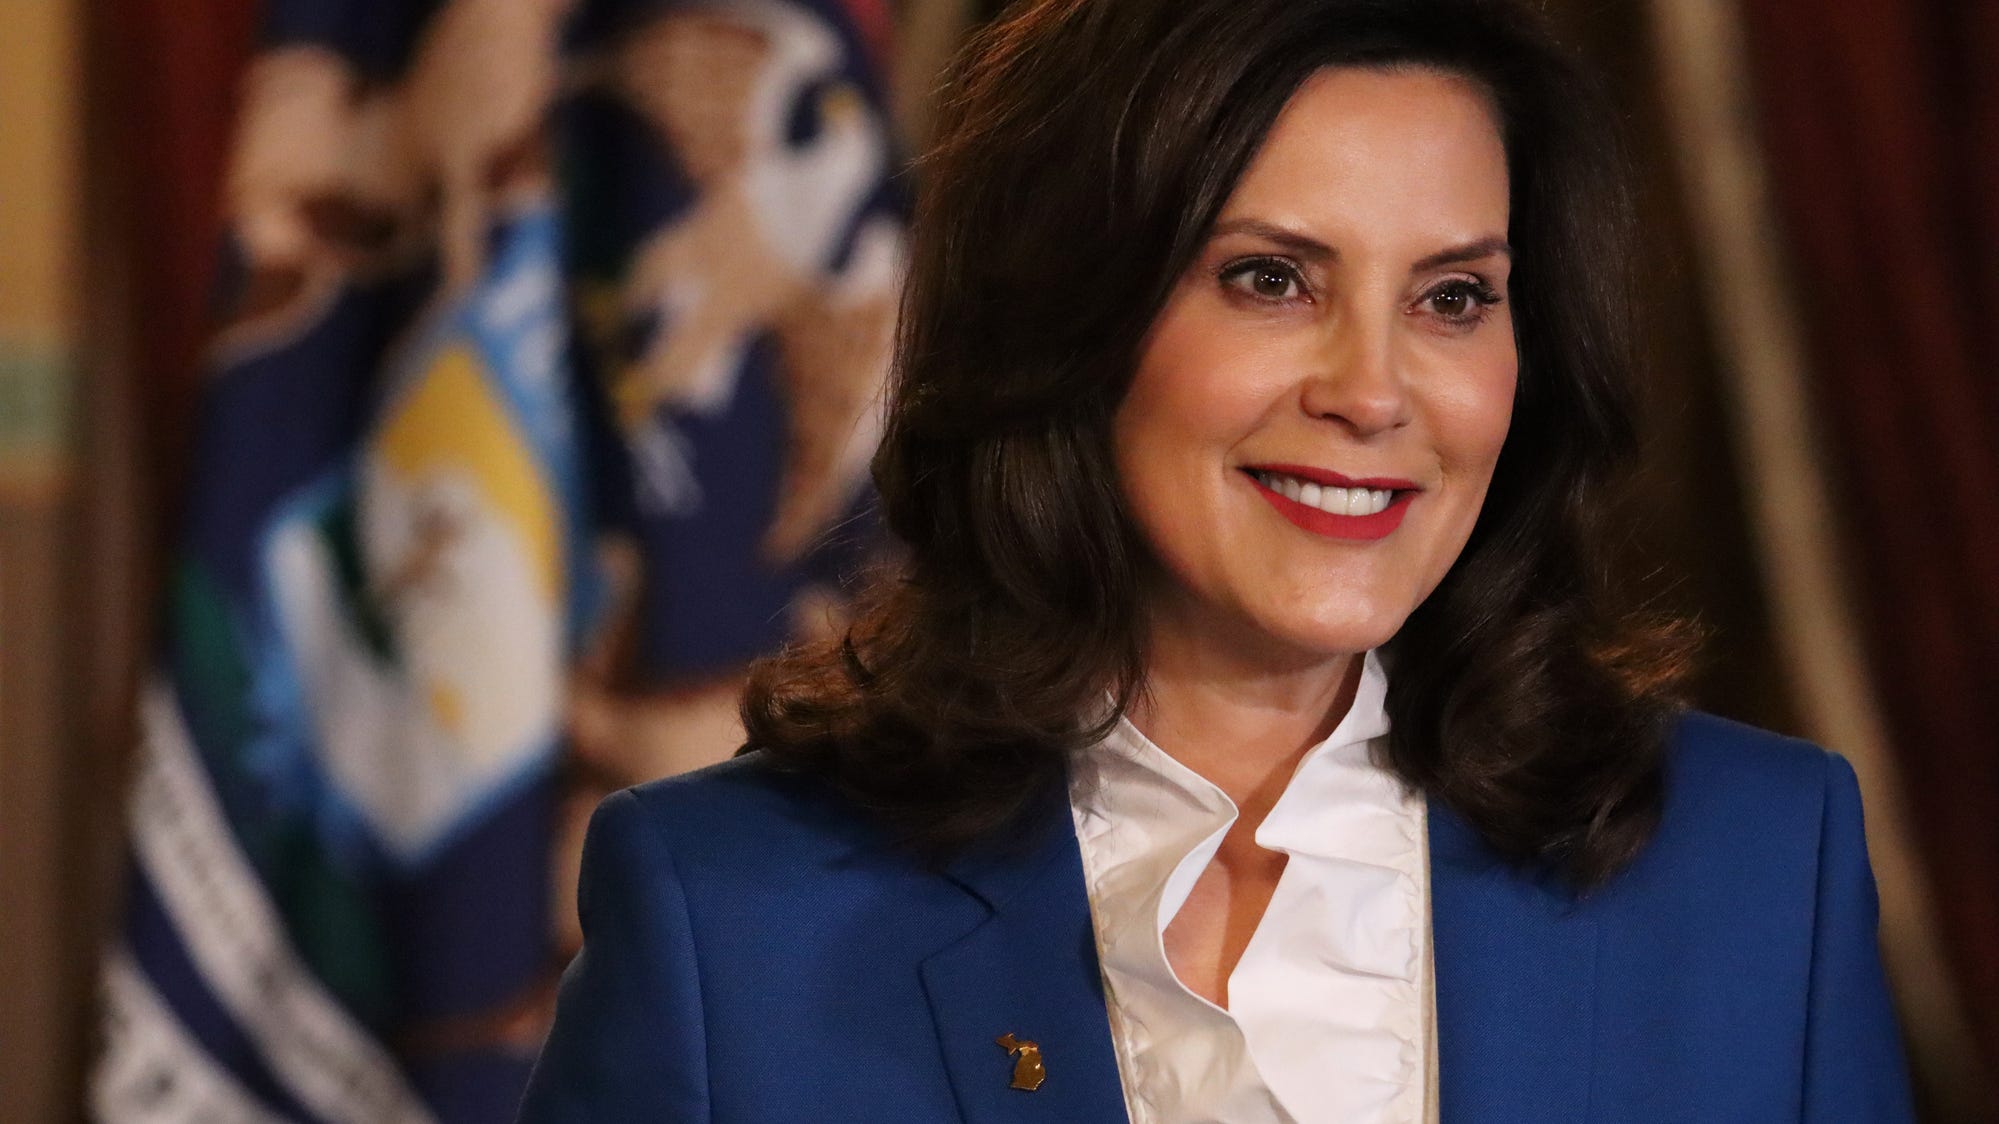 Why Whitmer faces reelection fight despite job approval rating